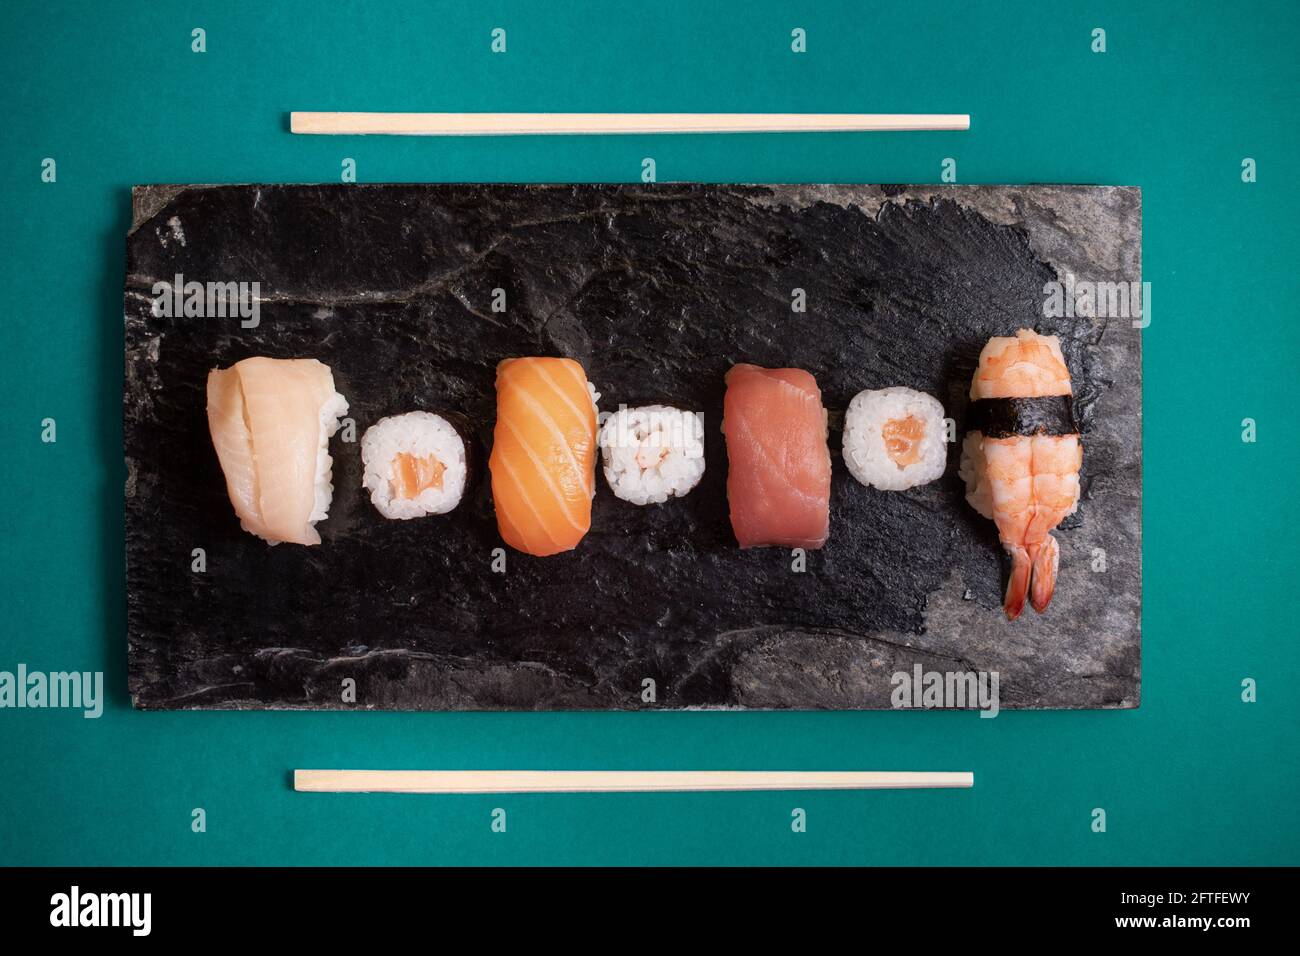 Horizontal photograph of sushi on a black plate with textures and sushi sticks on the sides. Turquoise background. Stock Photo